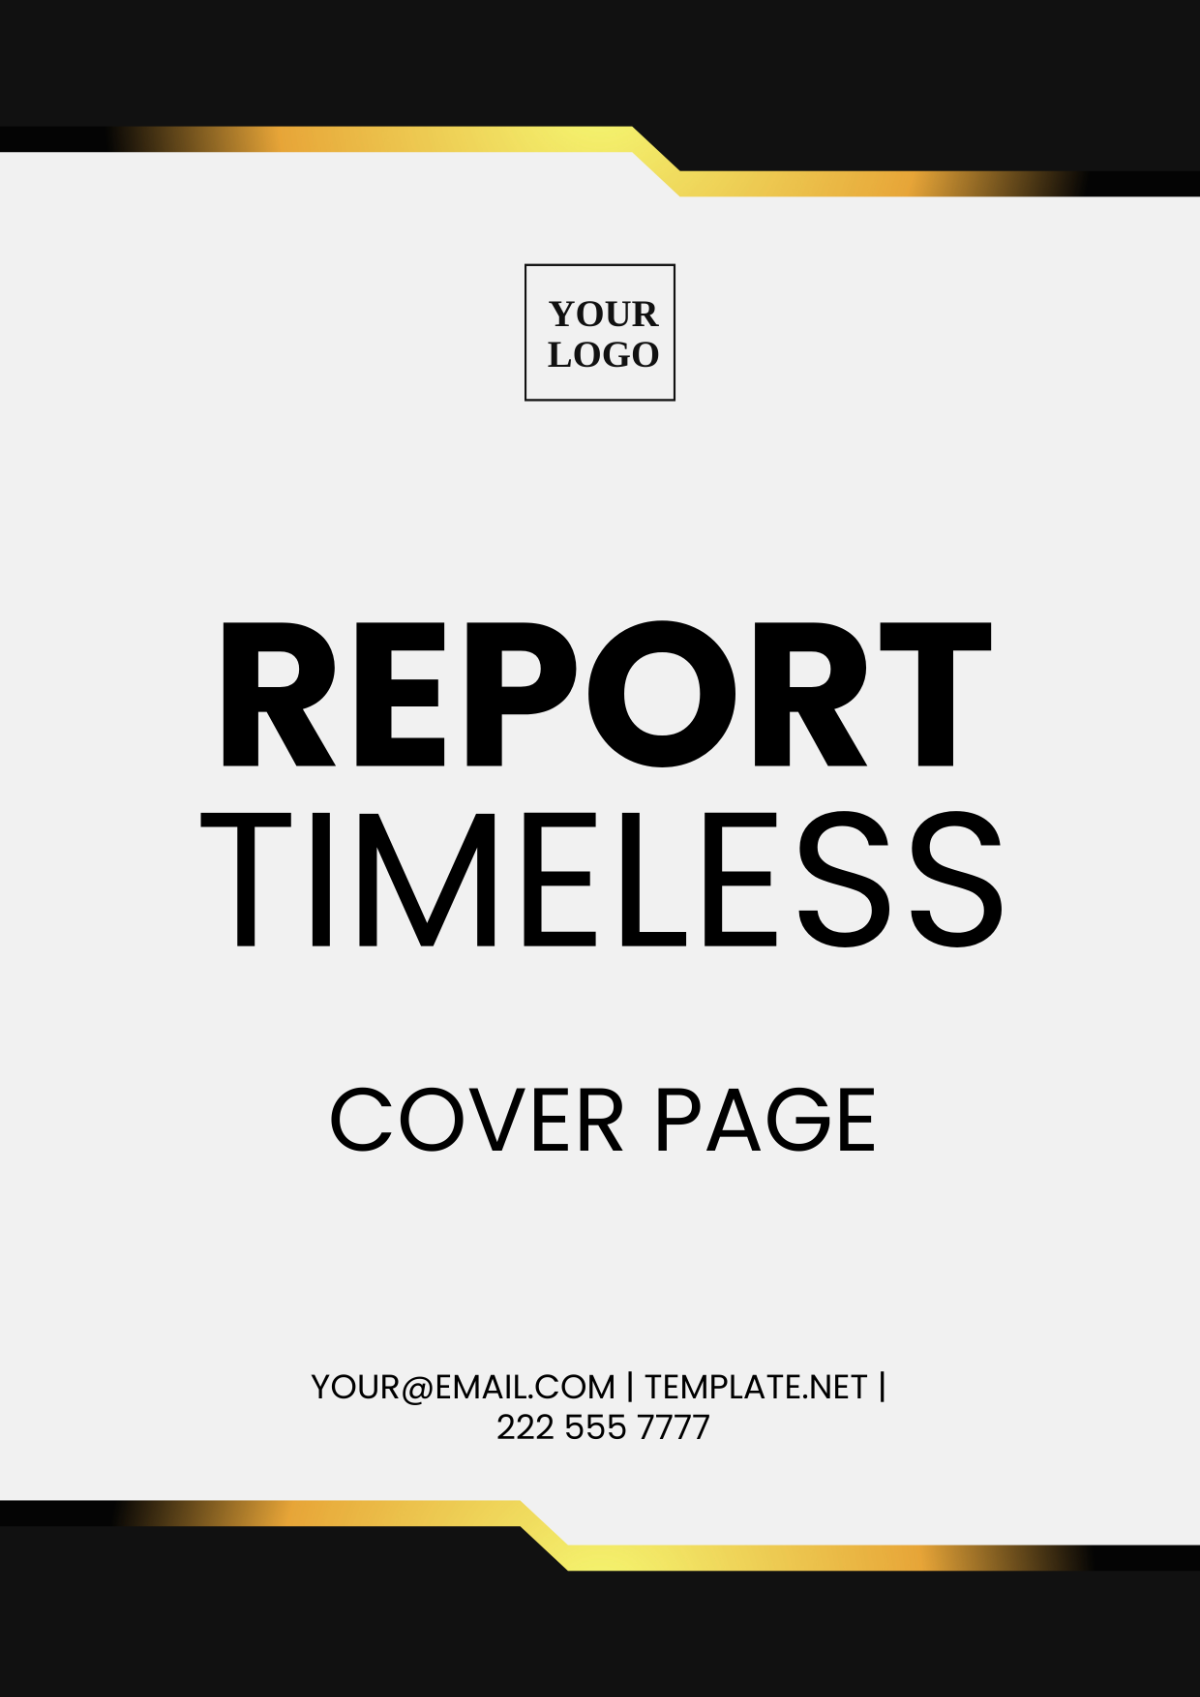 Report Timeless Cover Page Template